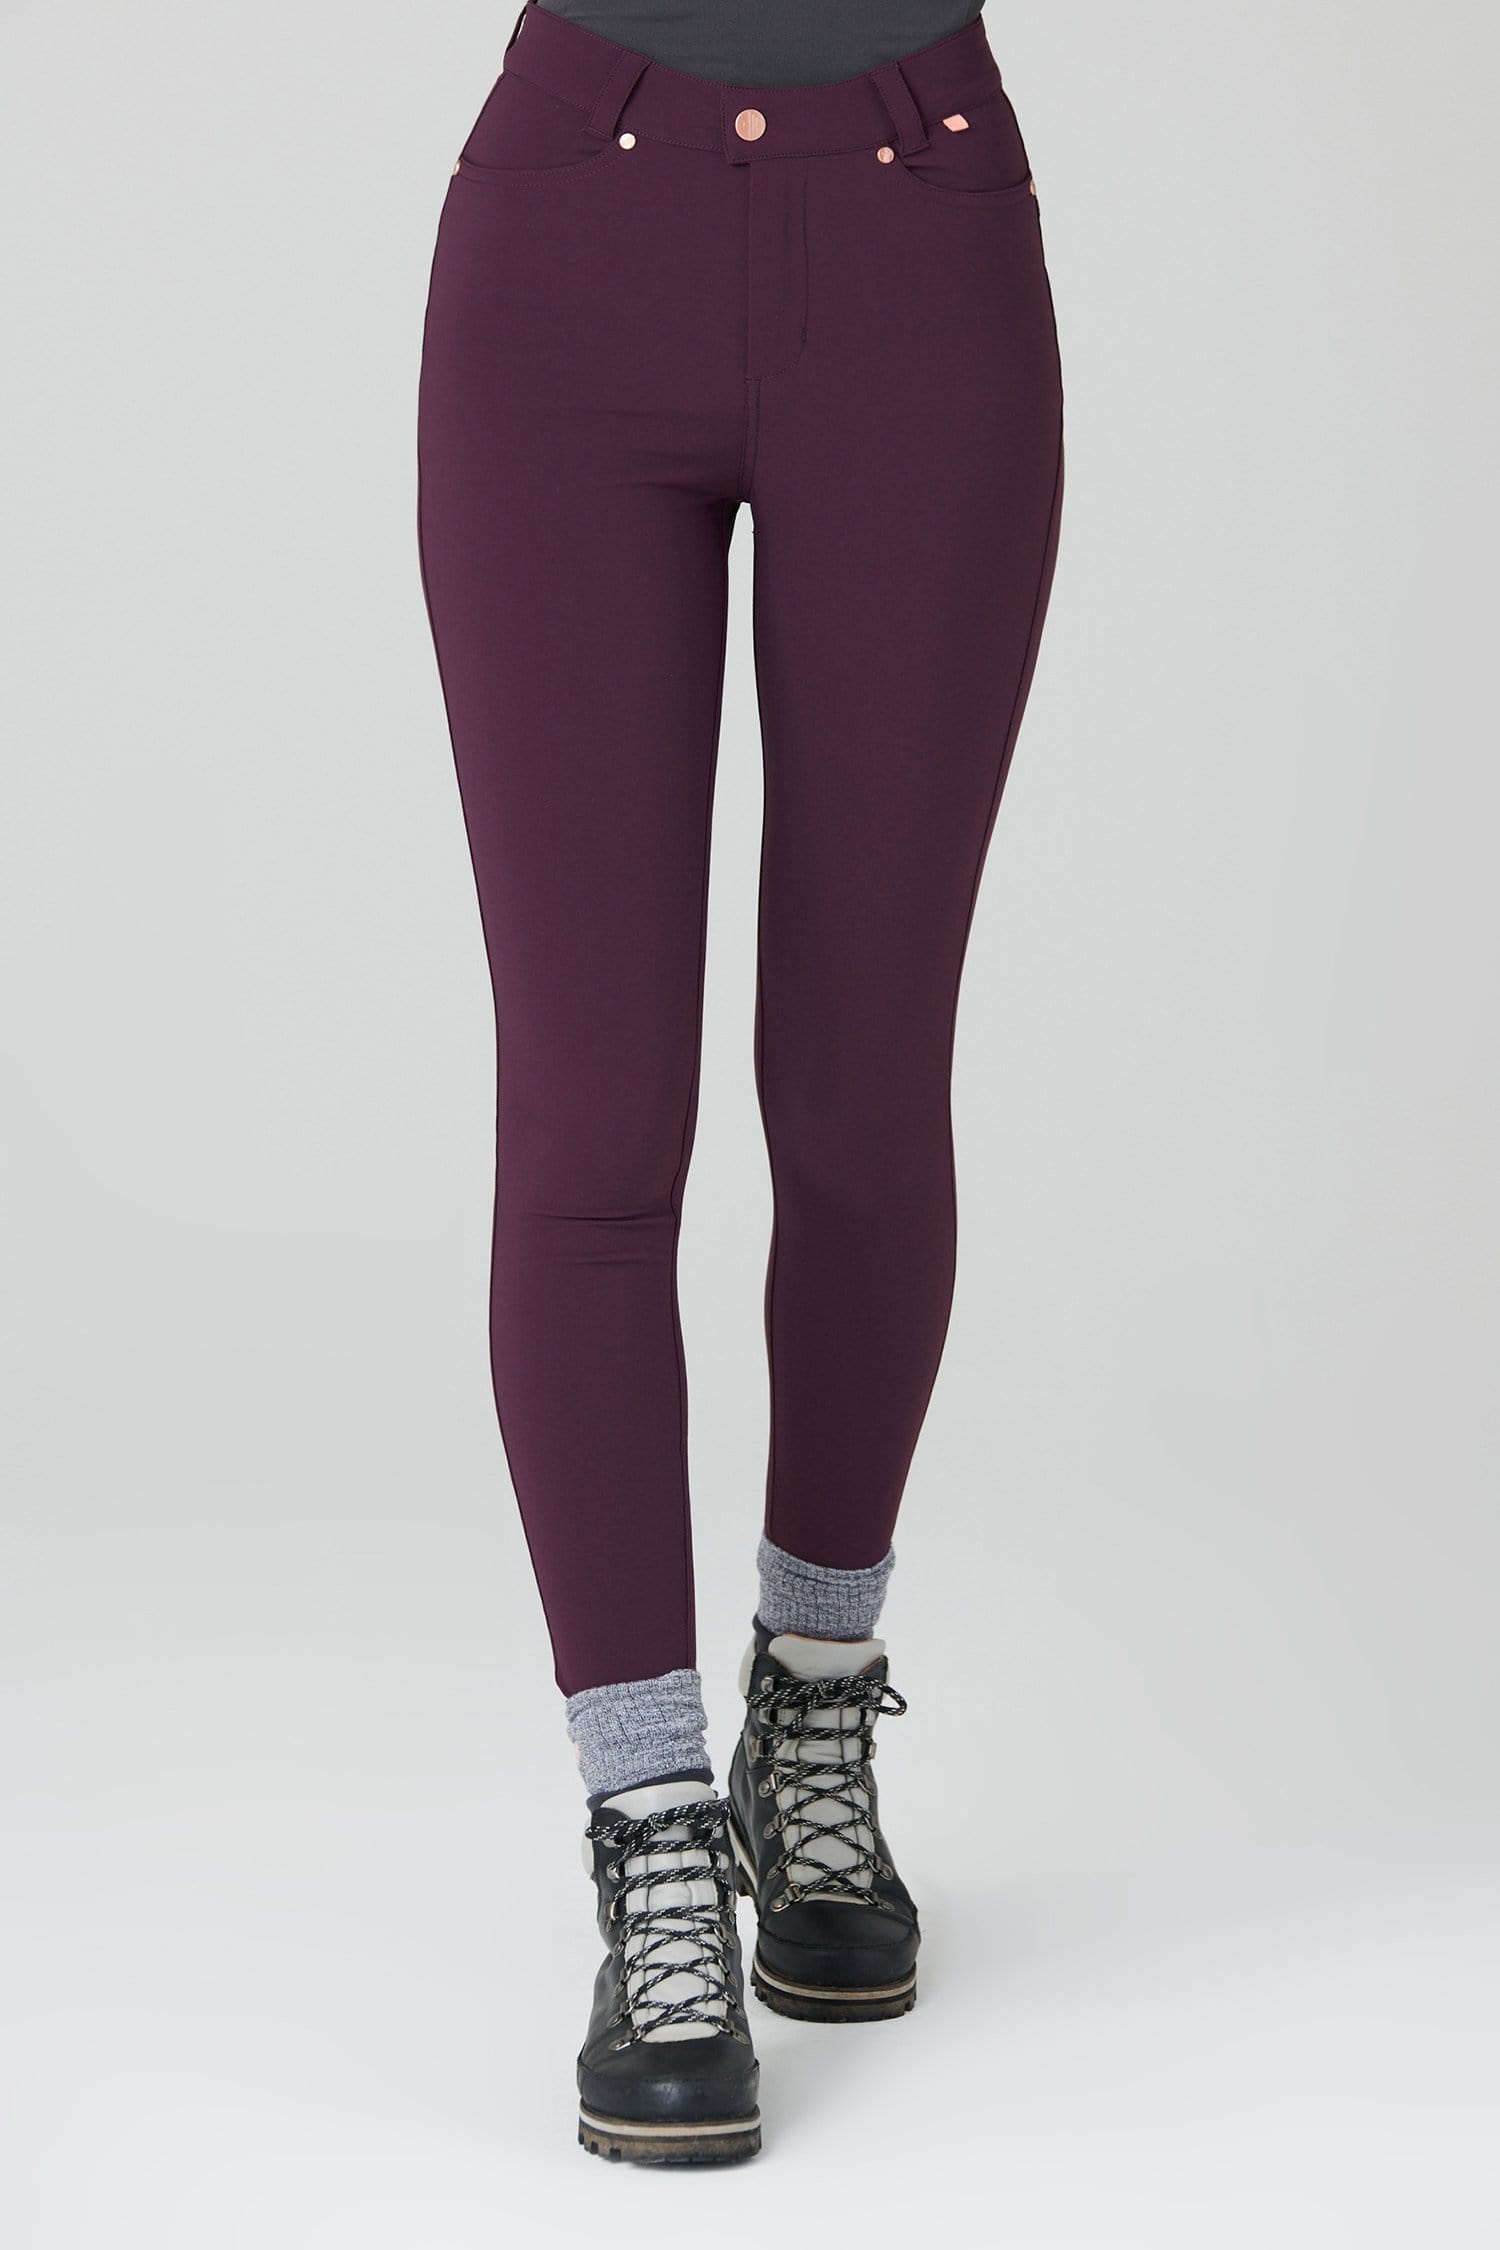 Max Stretch Skinny Outdoor Trousers - Aubergine - 34r / Uk16 - Womens - Acai Outdoorwear